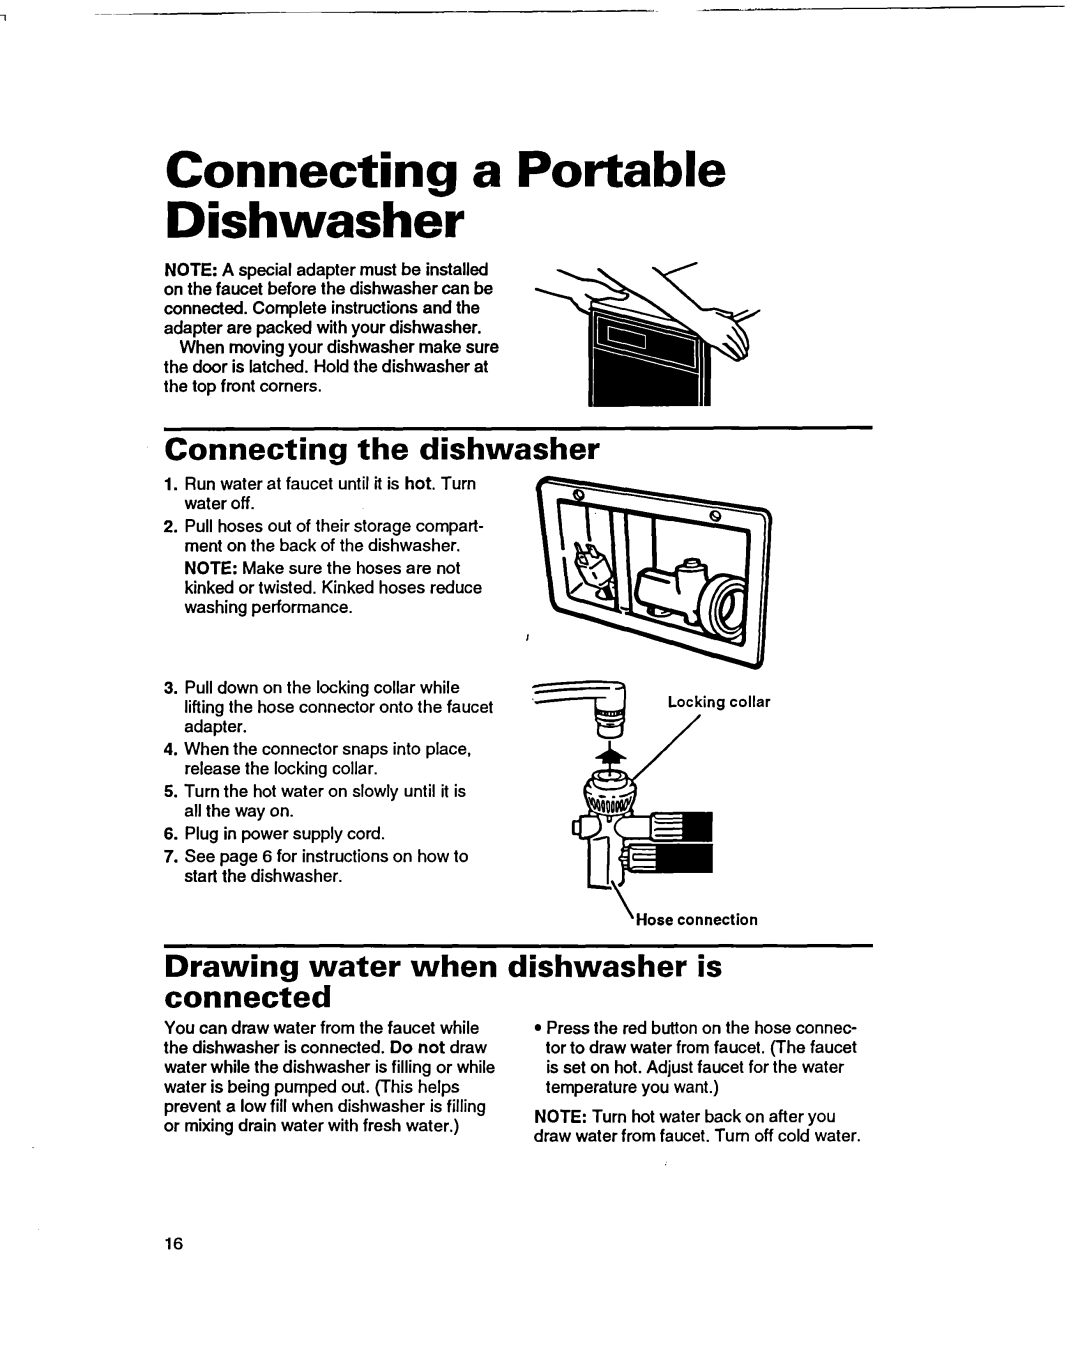 Whirlpool 400 Connecting a Portable Dishwasher, Connecting the dishwasher, Drawing water when connected, dishwasher is 